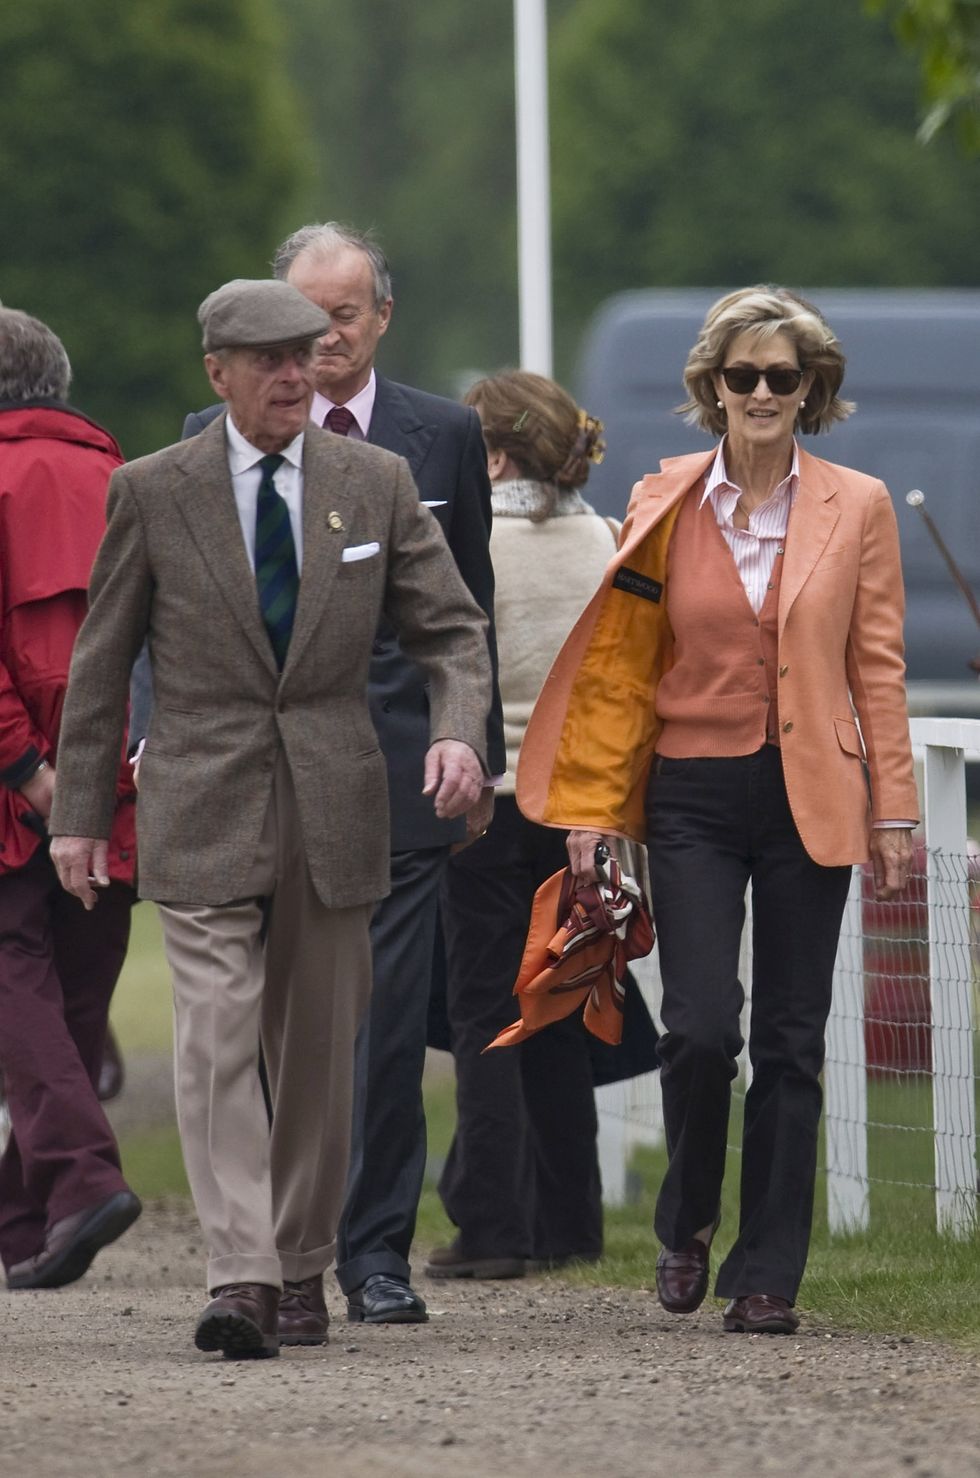 windsor, england   may 14  hrh prince phillip, duke of edinburgh arrives with lady brabourne to watch riding for the disabled class on the second day of the windosr horse show  on may 14, 2009 in windsor, england  photo by marco secchigetty images